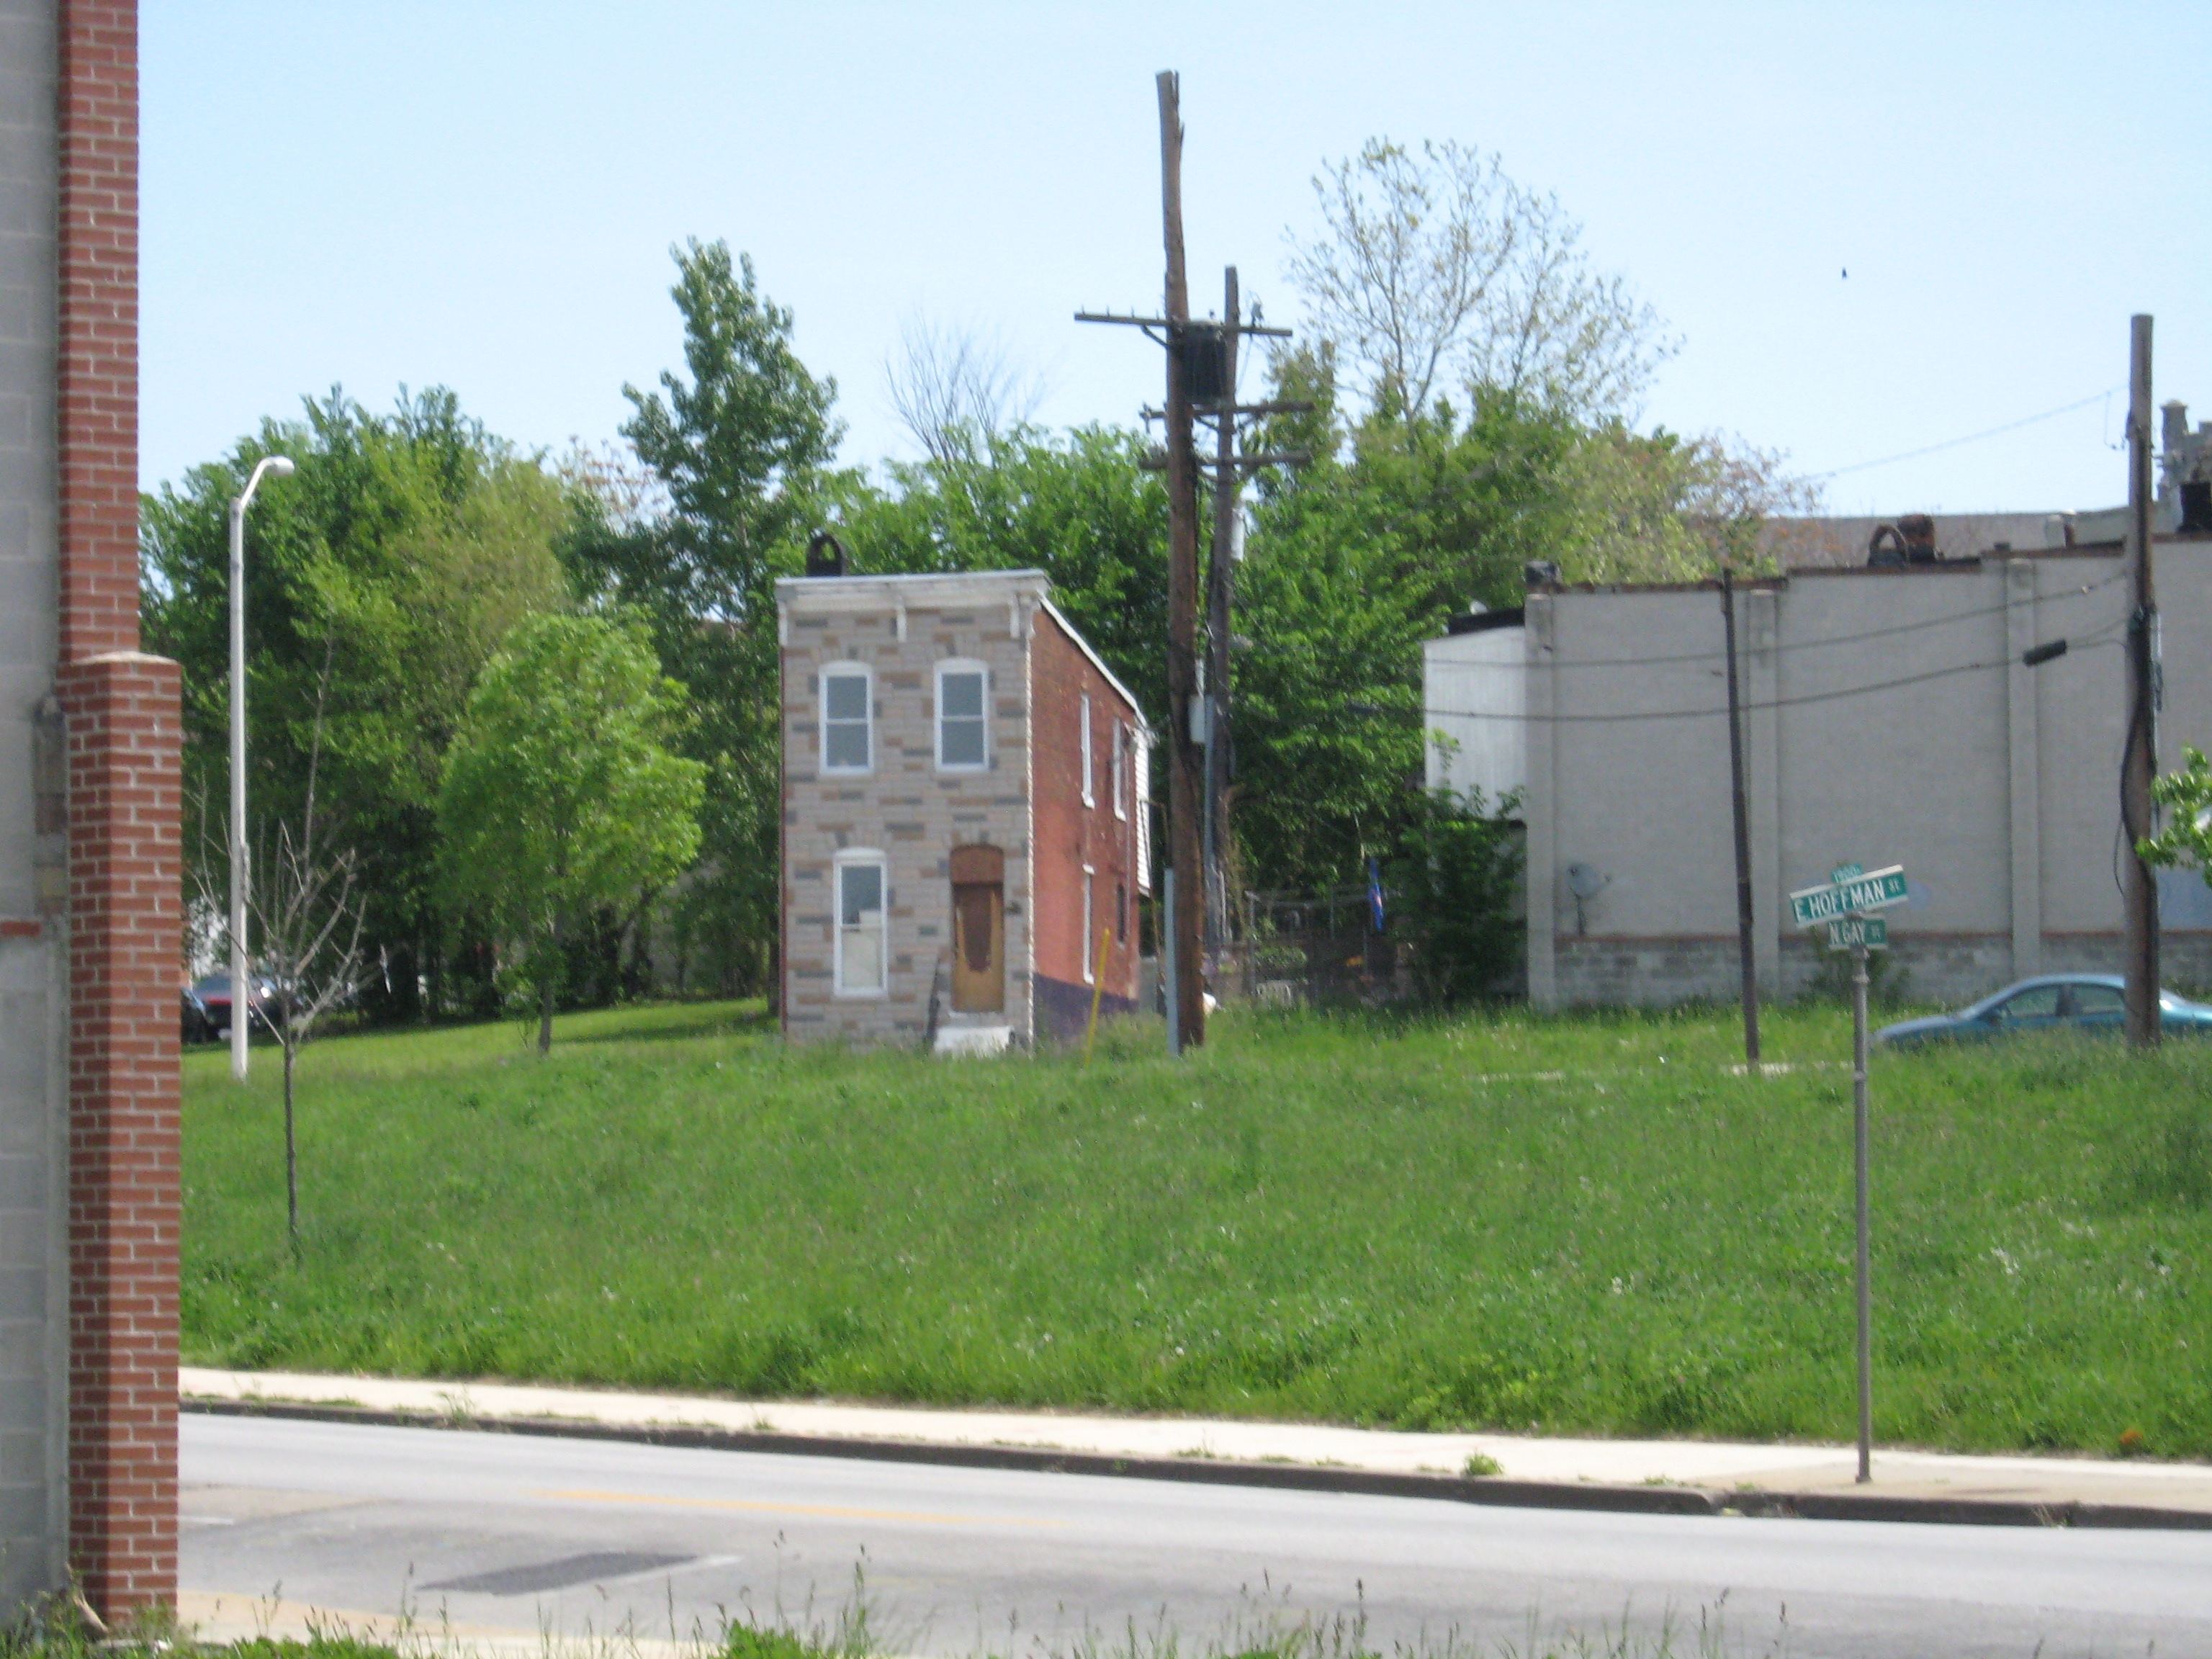 Photograph of a single remaining row house on a Baltimore street by Justin Hollander